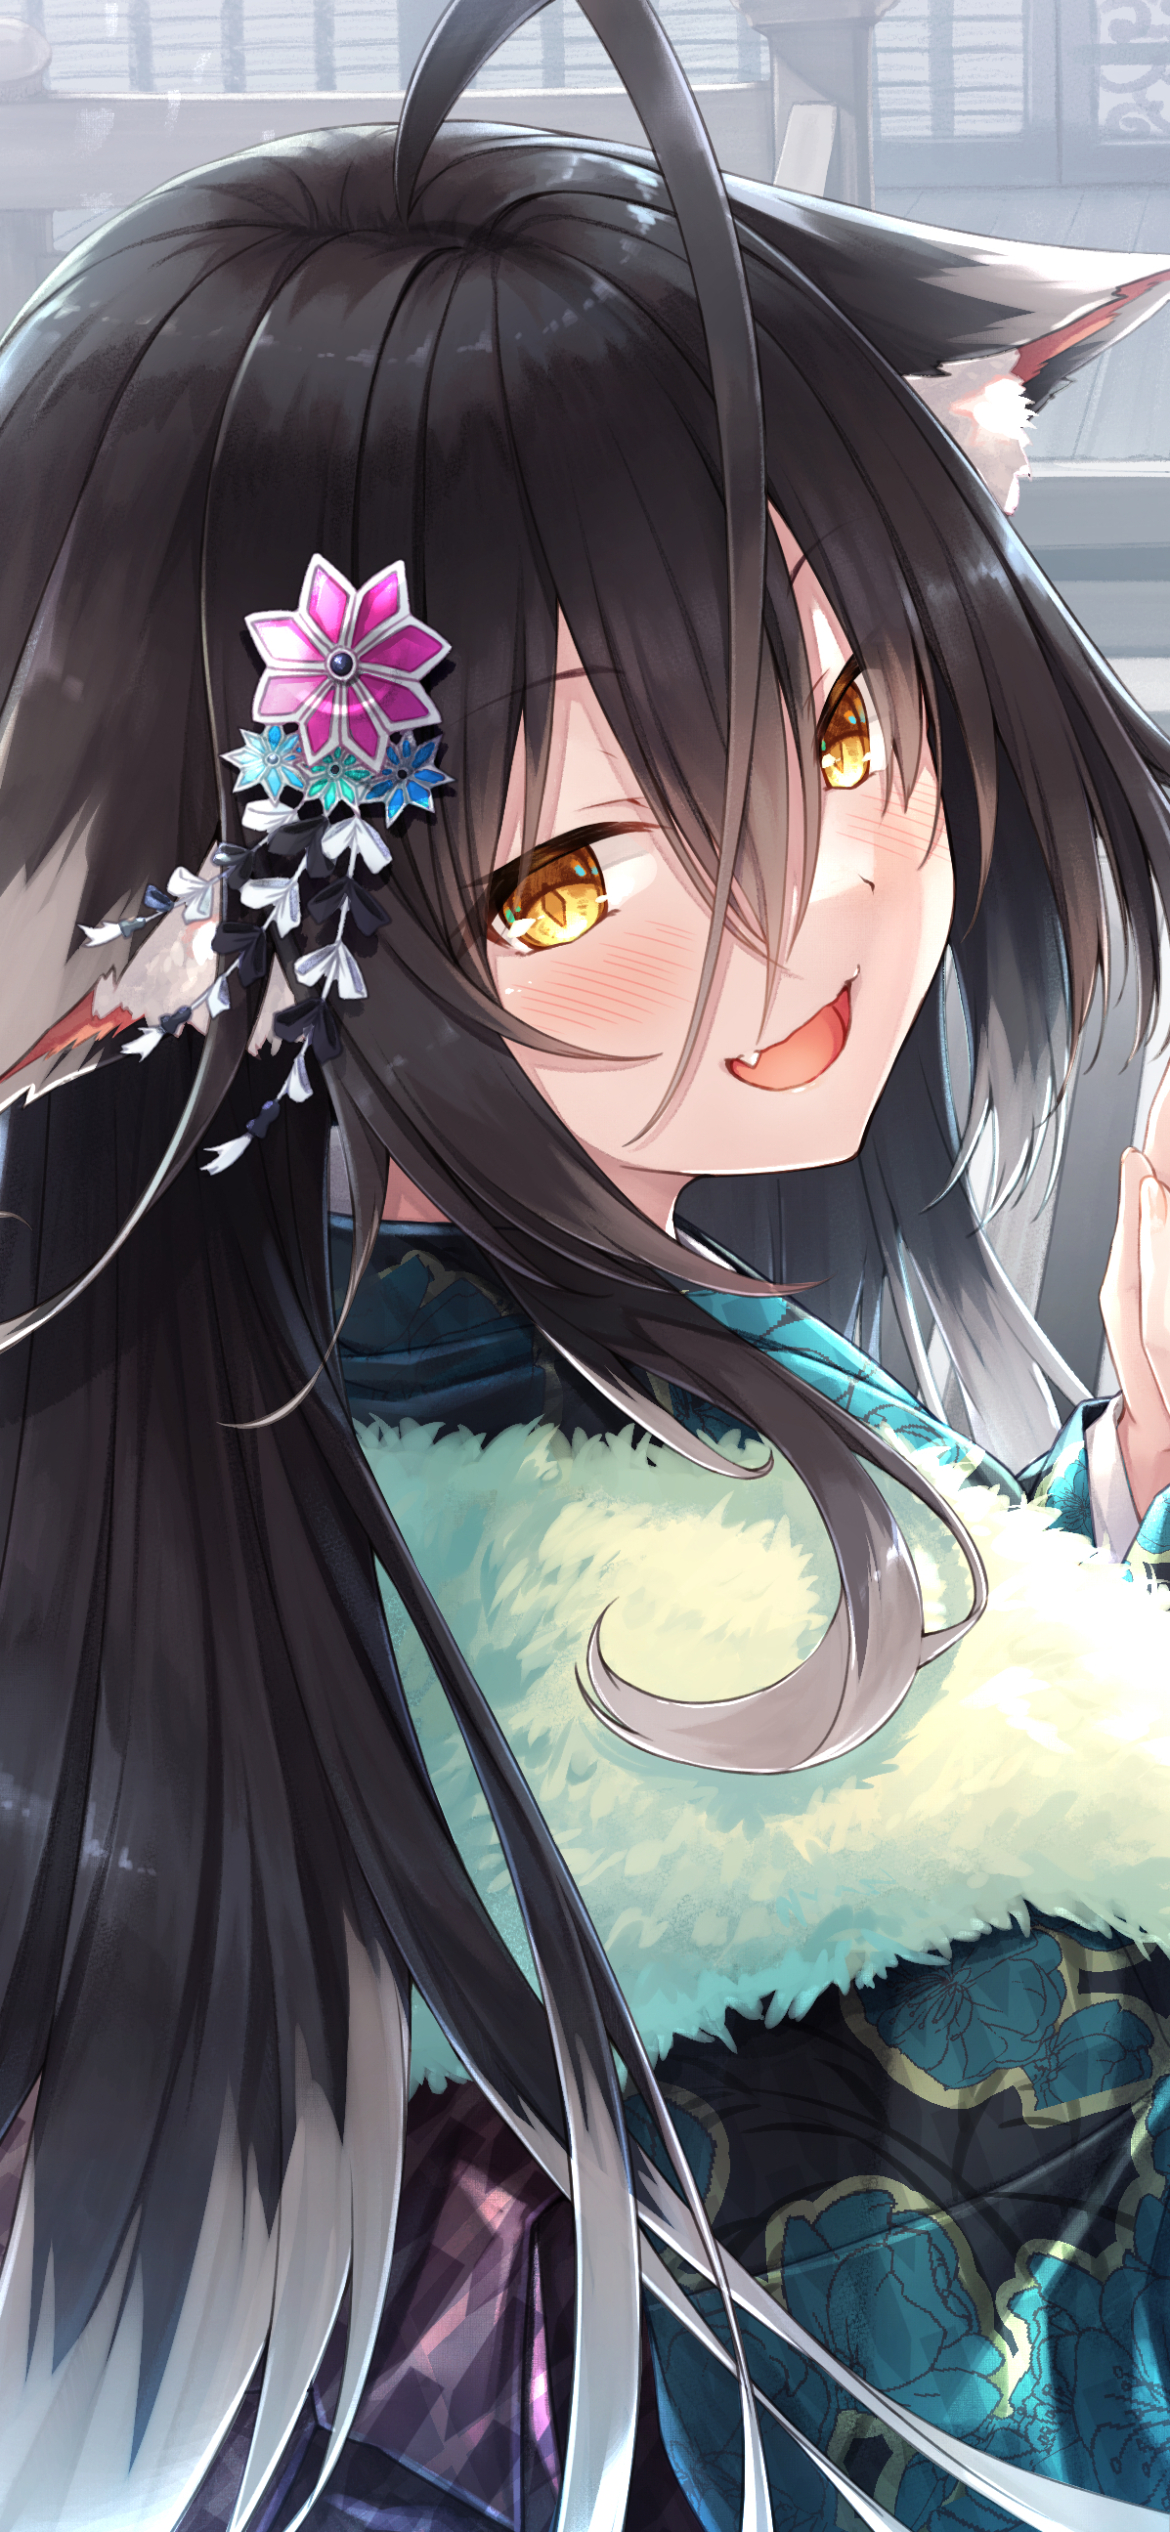 anime girl with long black hair and black eyes